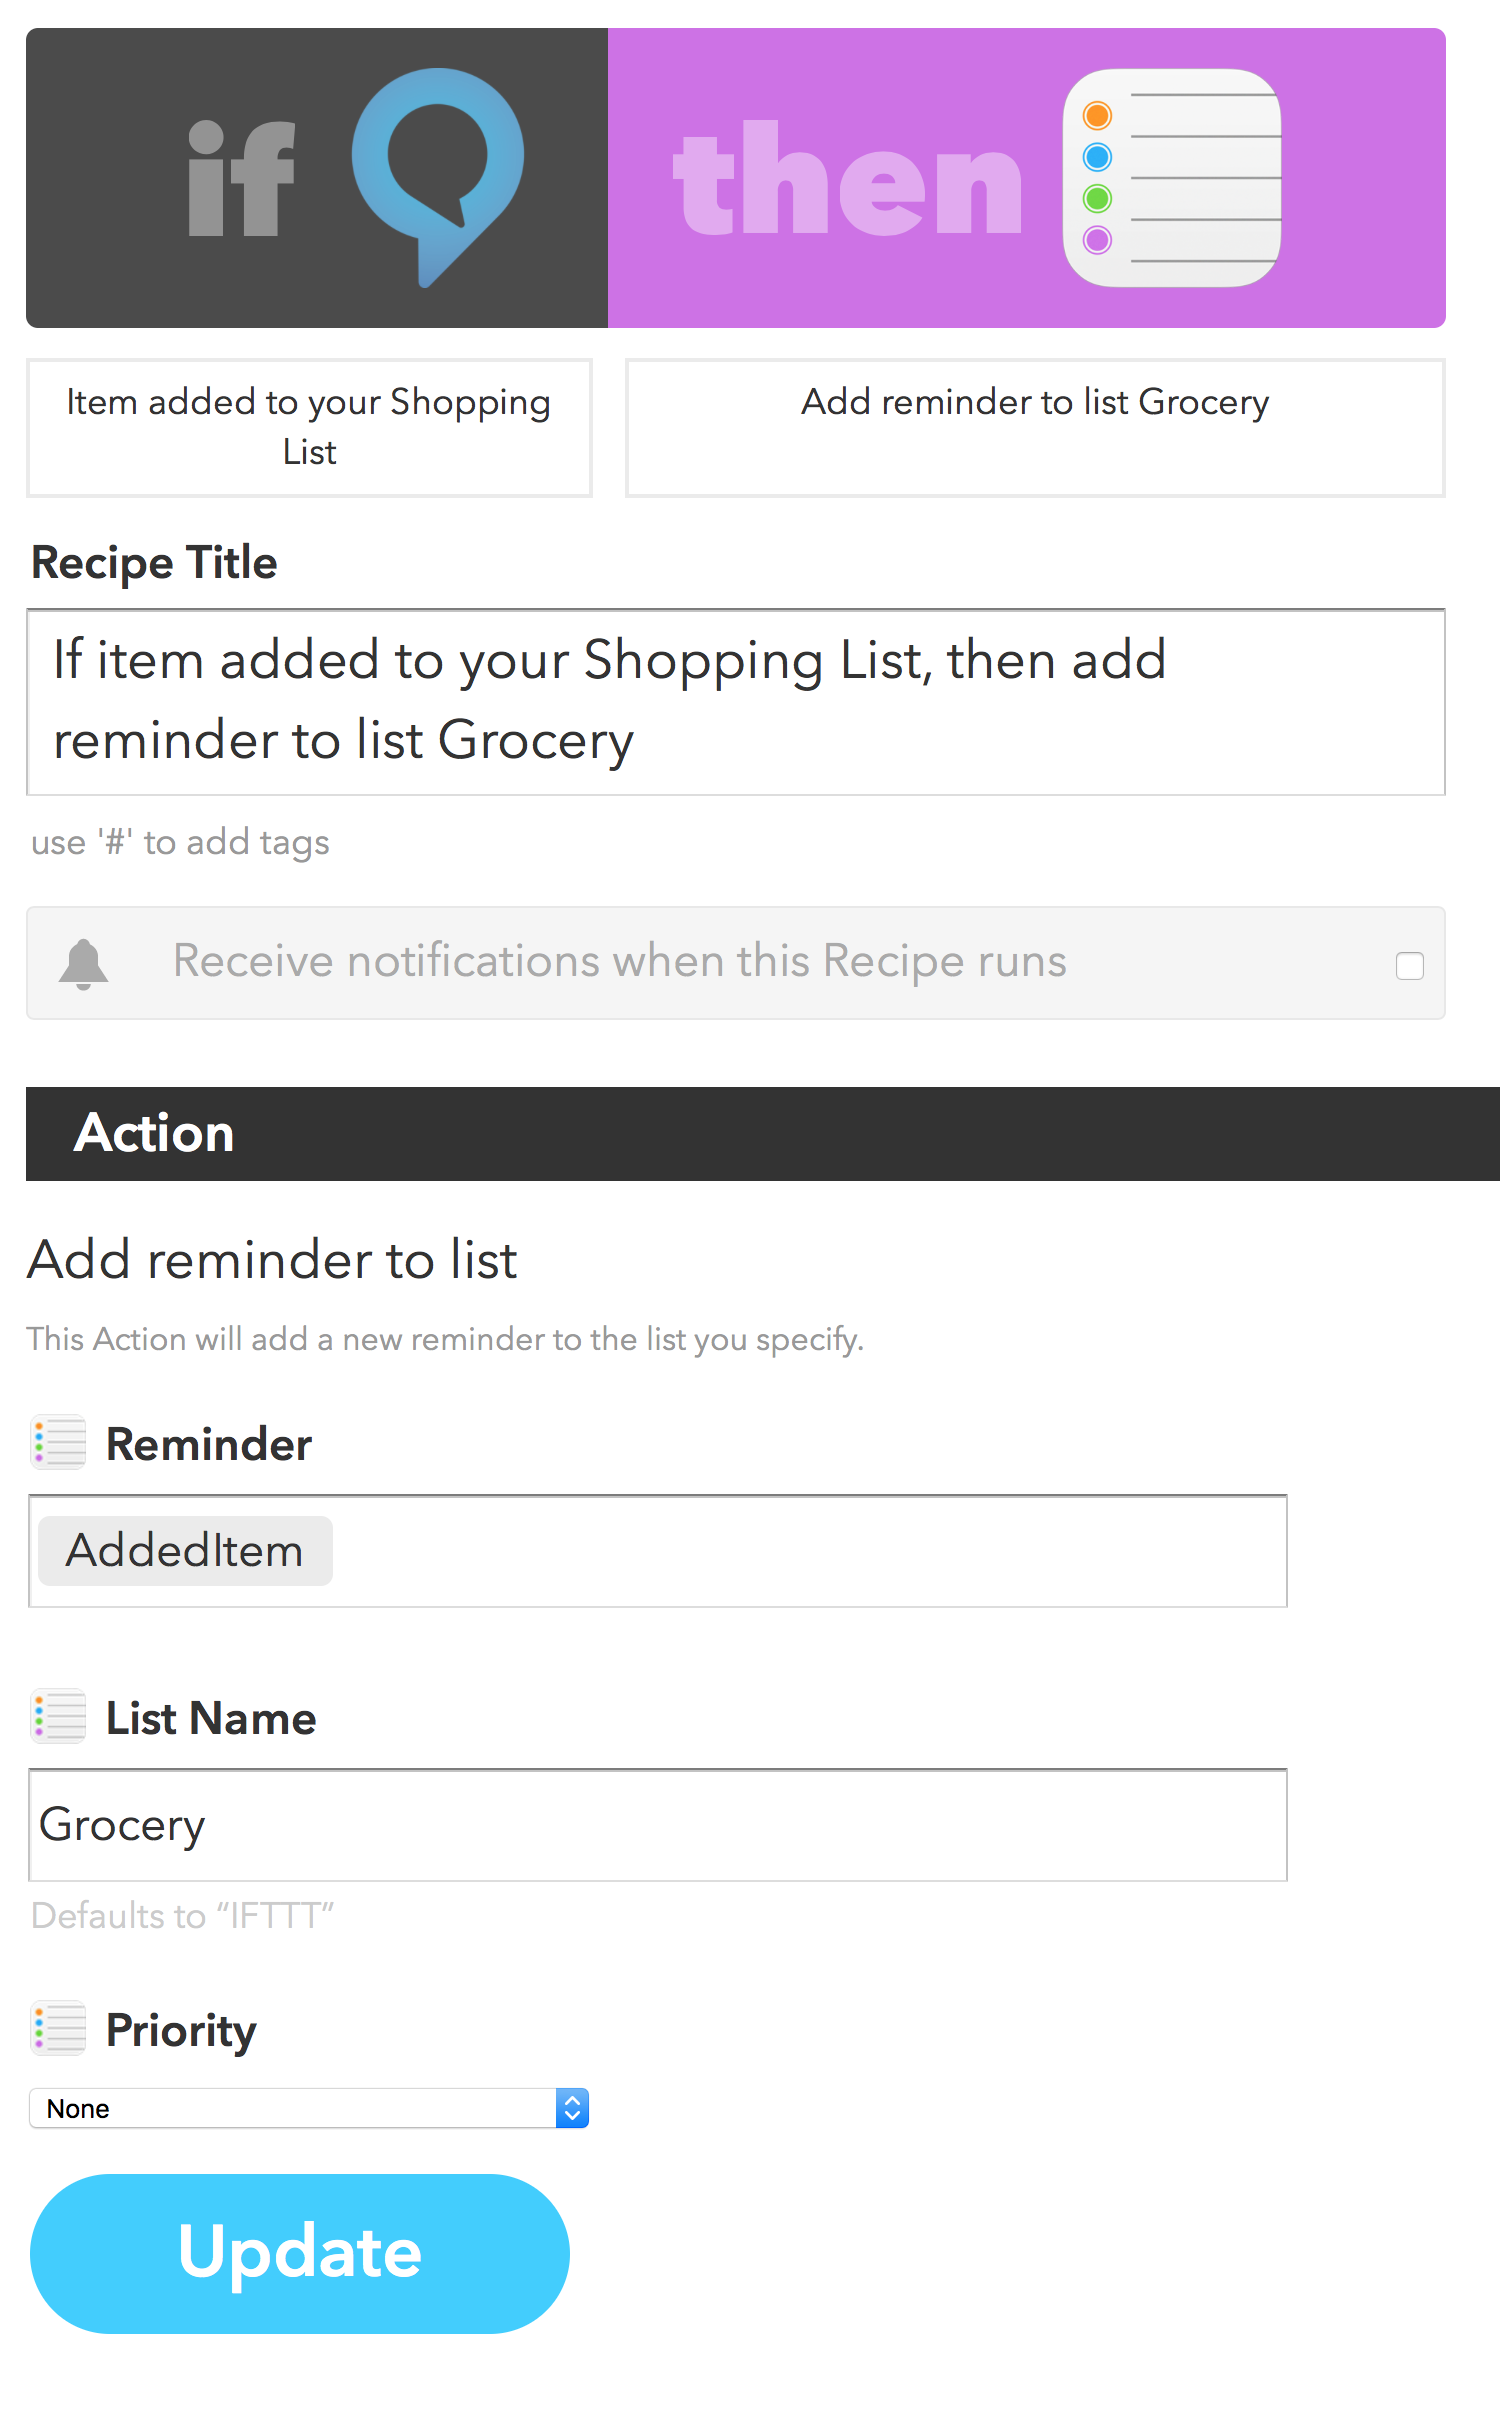 Moving Alexa Shopping List Items to Reminders Grocery List via IFTTT